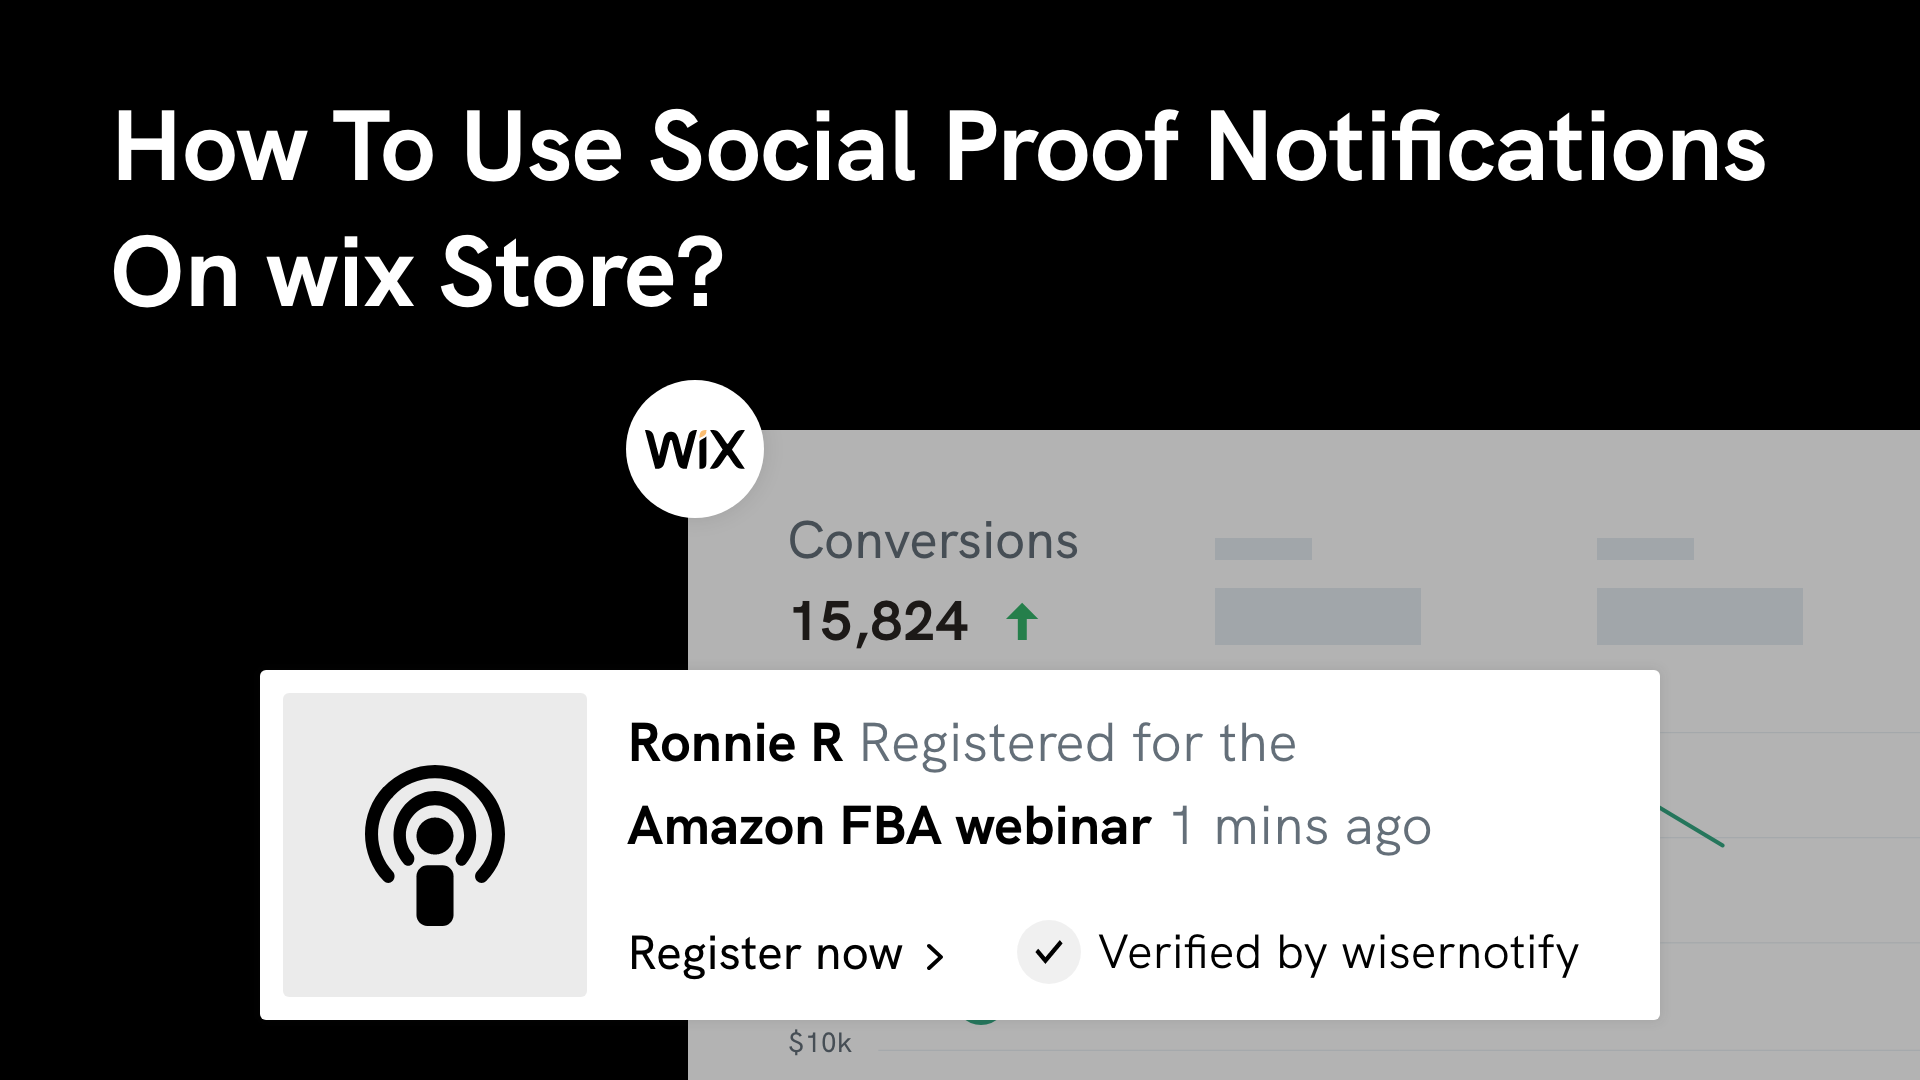 https://wisernotify.com/wp-content/uploads/2022/06/How-to-Use-Social-Proof-Notifications-on-Wix-Store.png